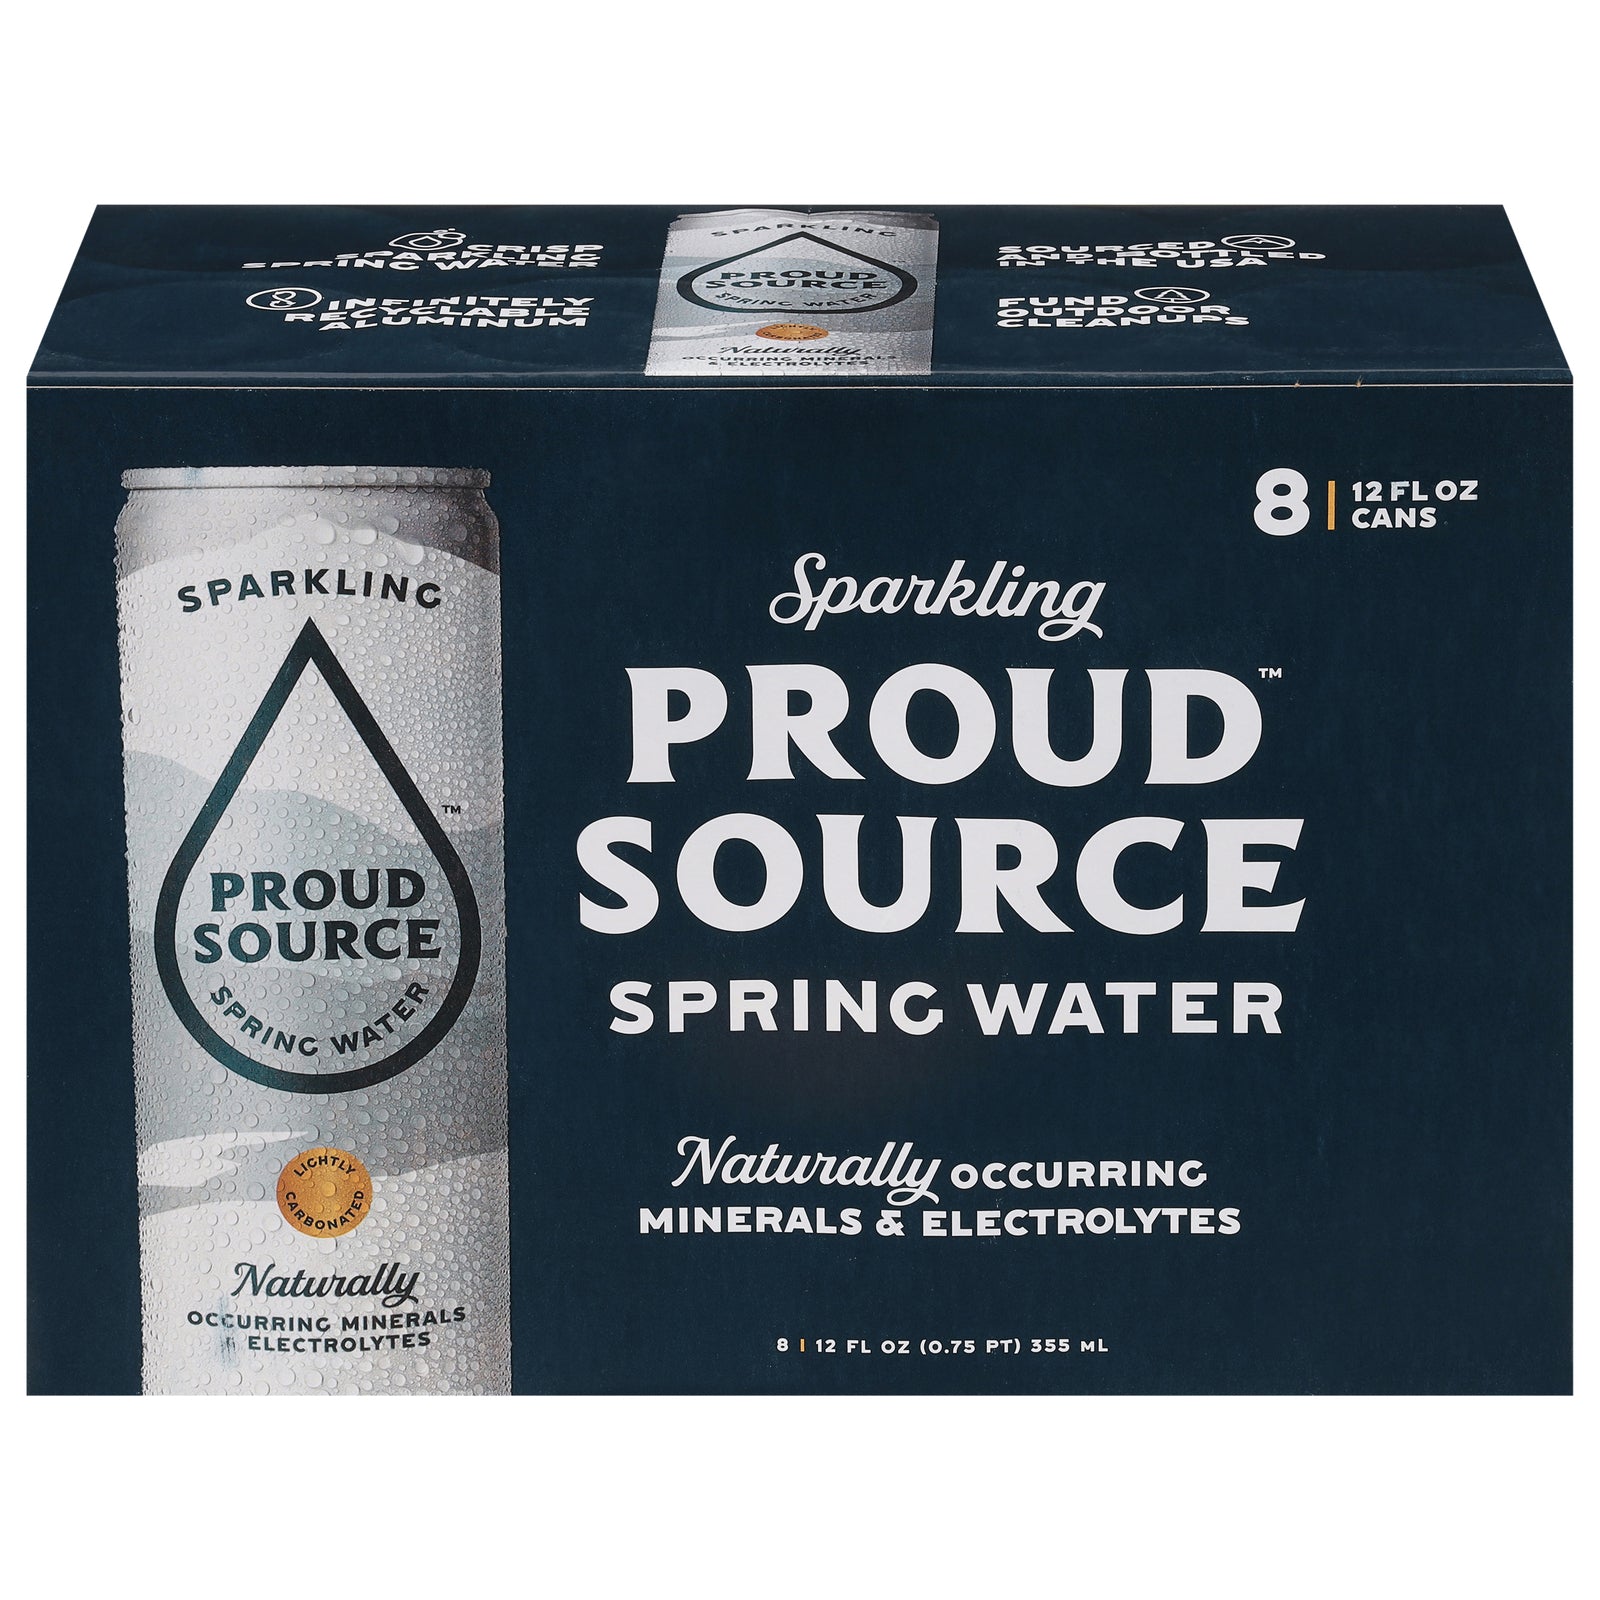 Proud Source - Water Spring Sparkling - Case of 3-8/12 FZ